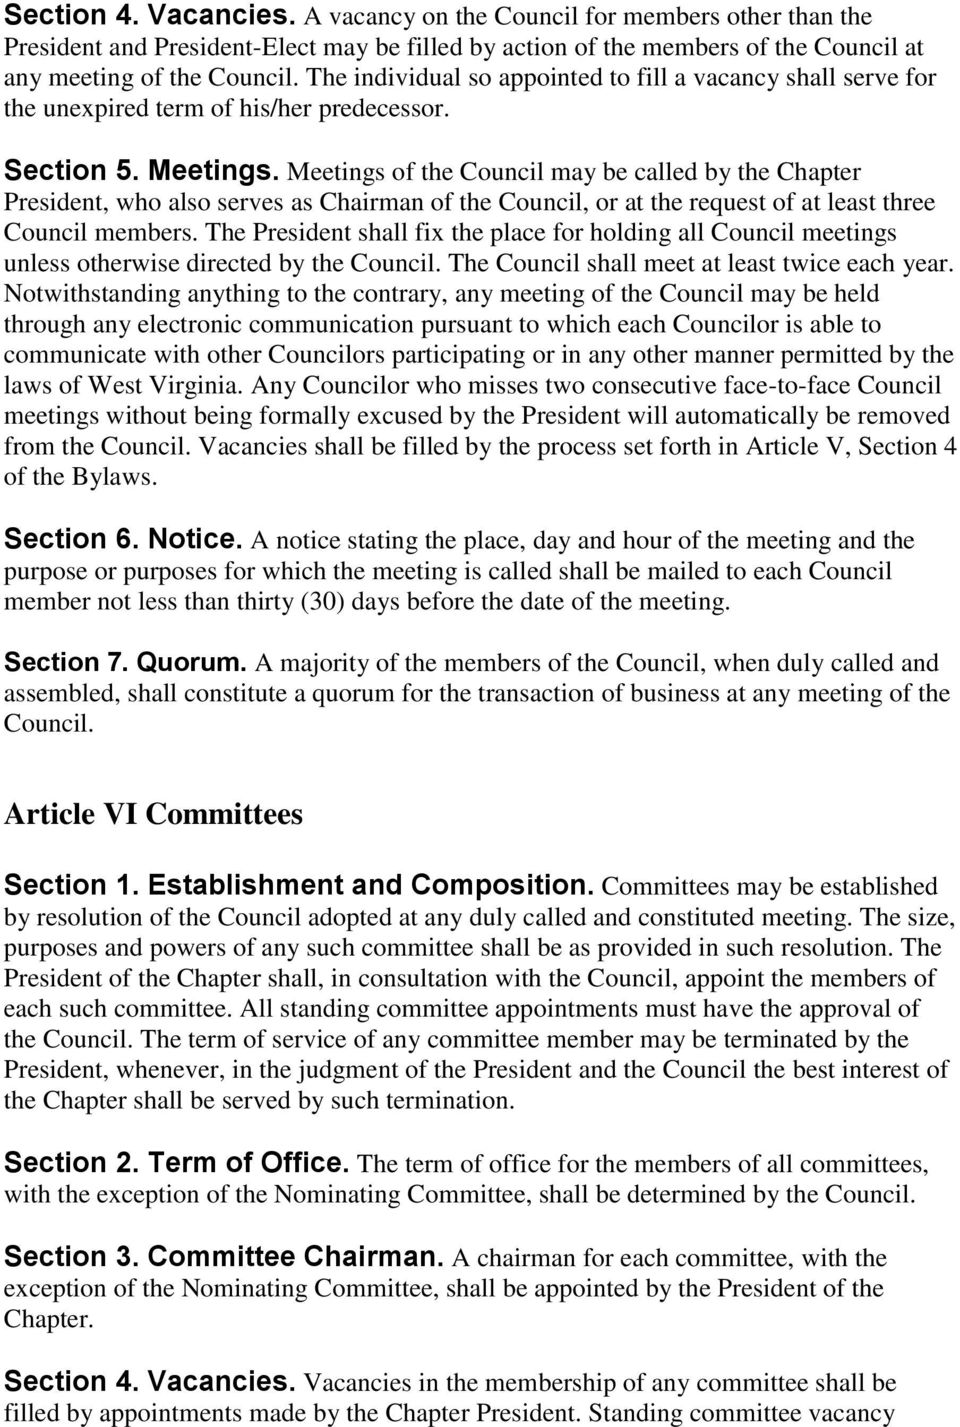 Meetings of the Council may be called by the Chapter President, who also serves as Chairman of the Council, or at the request of at least three Council members.